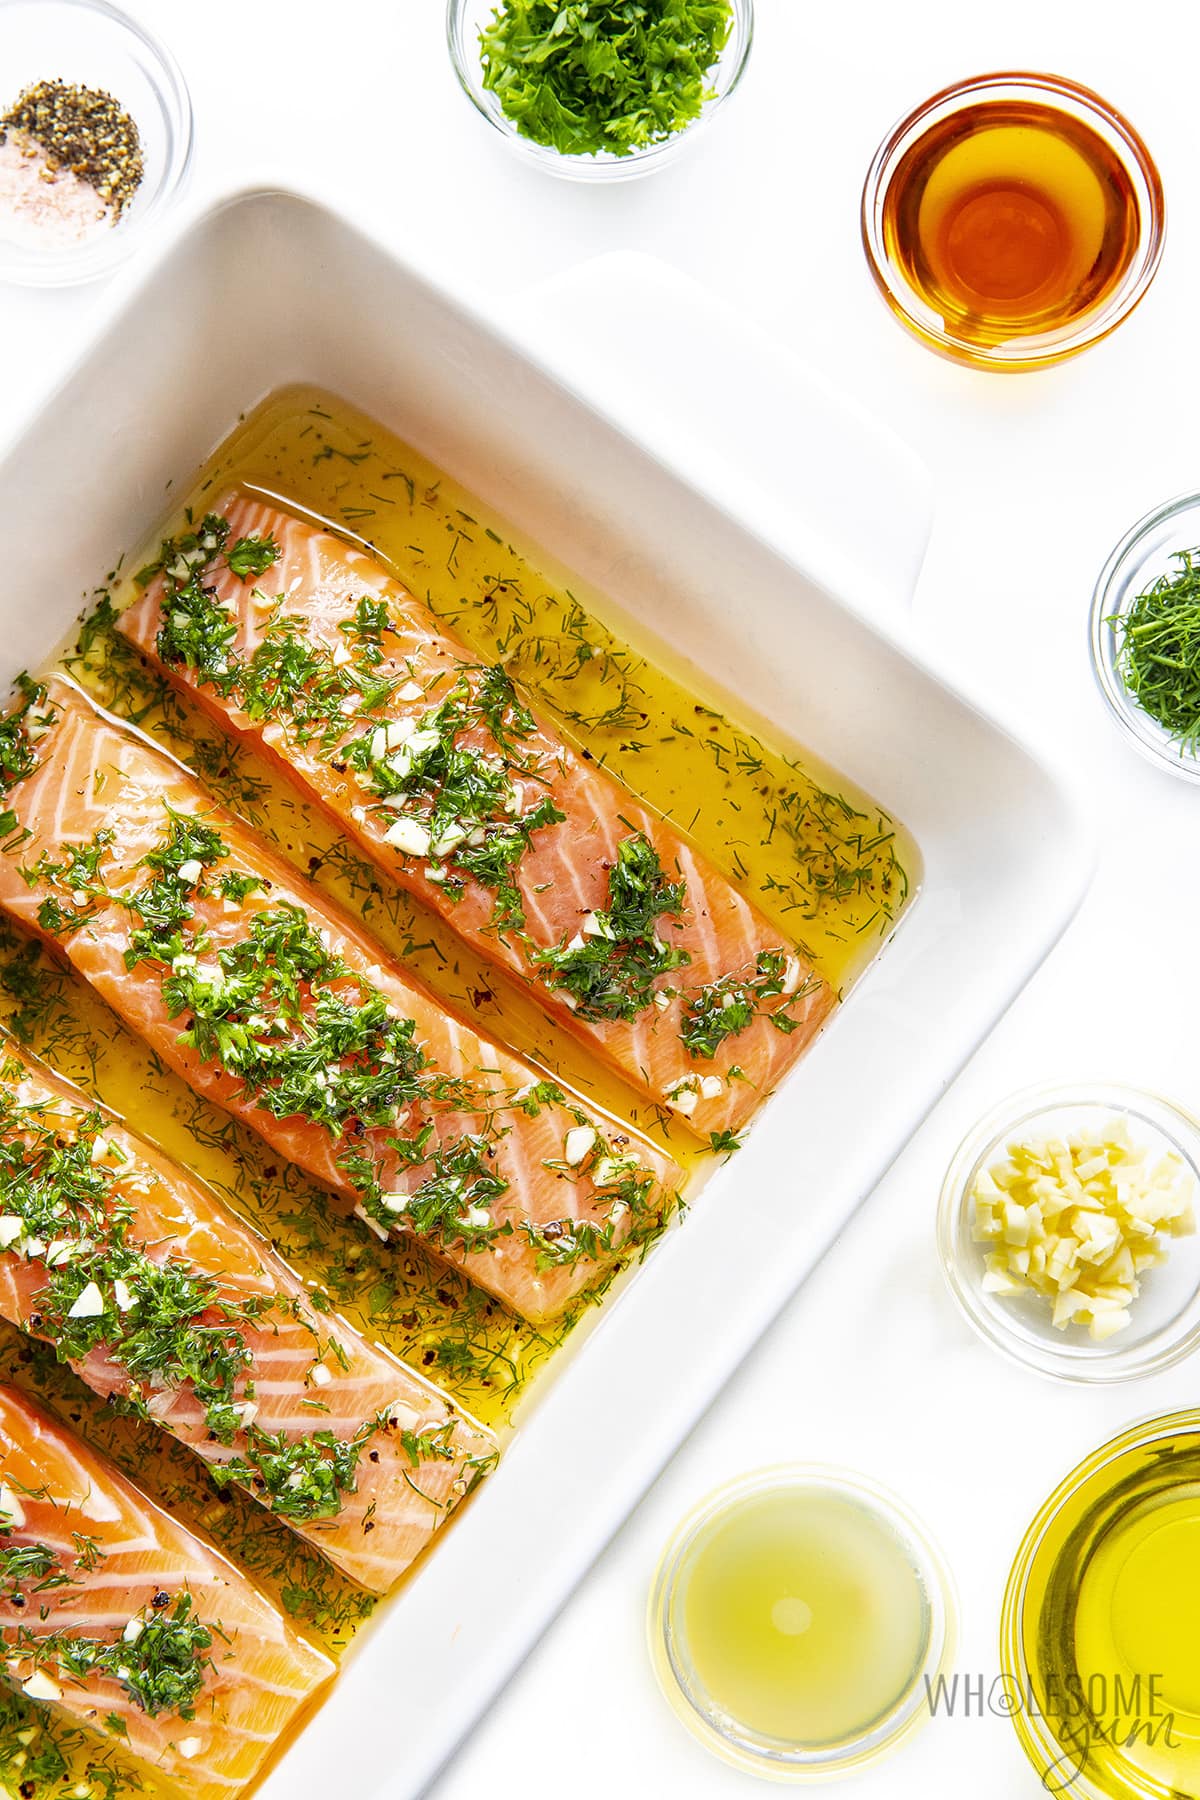 For this salmon marinade recipe, add fish fillets to the griddle.